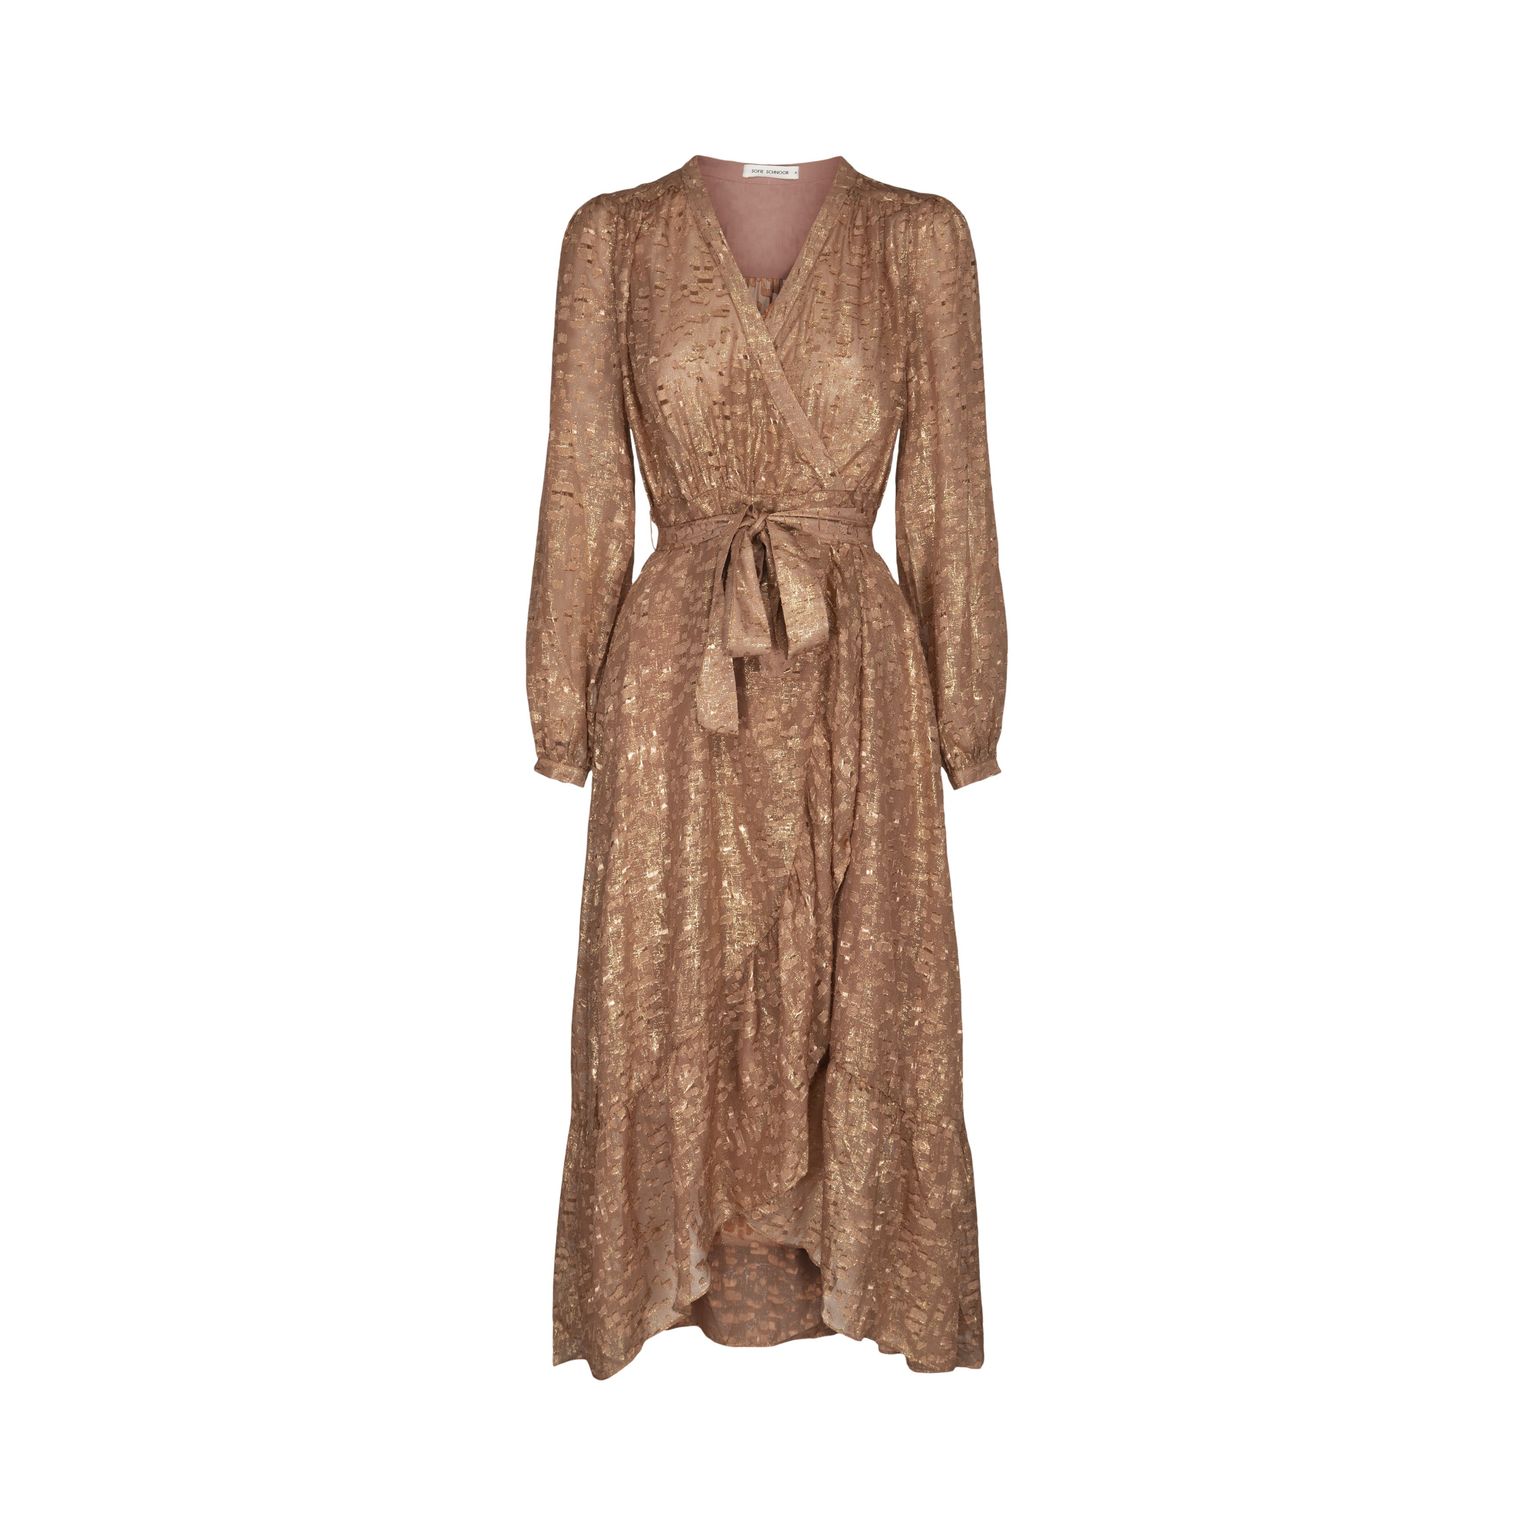 Dusky Pink Wrap Dress with Gold Stitching - Si Jolie